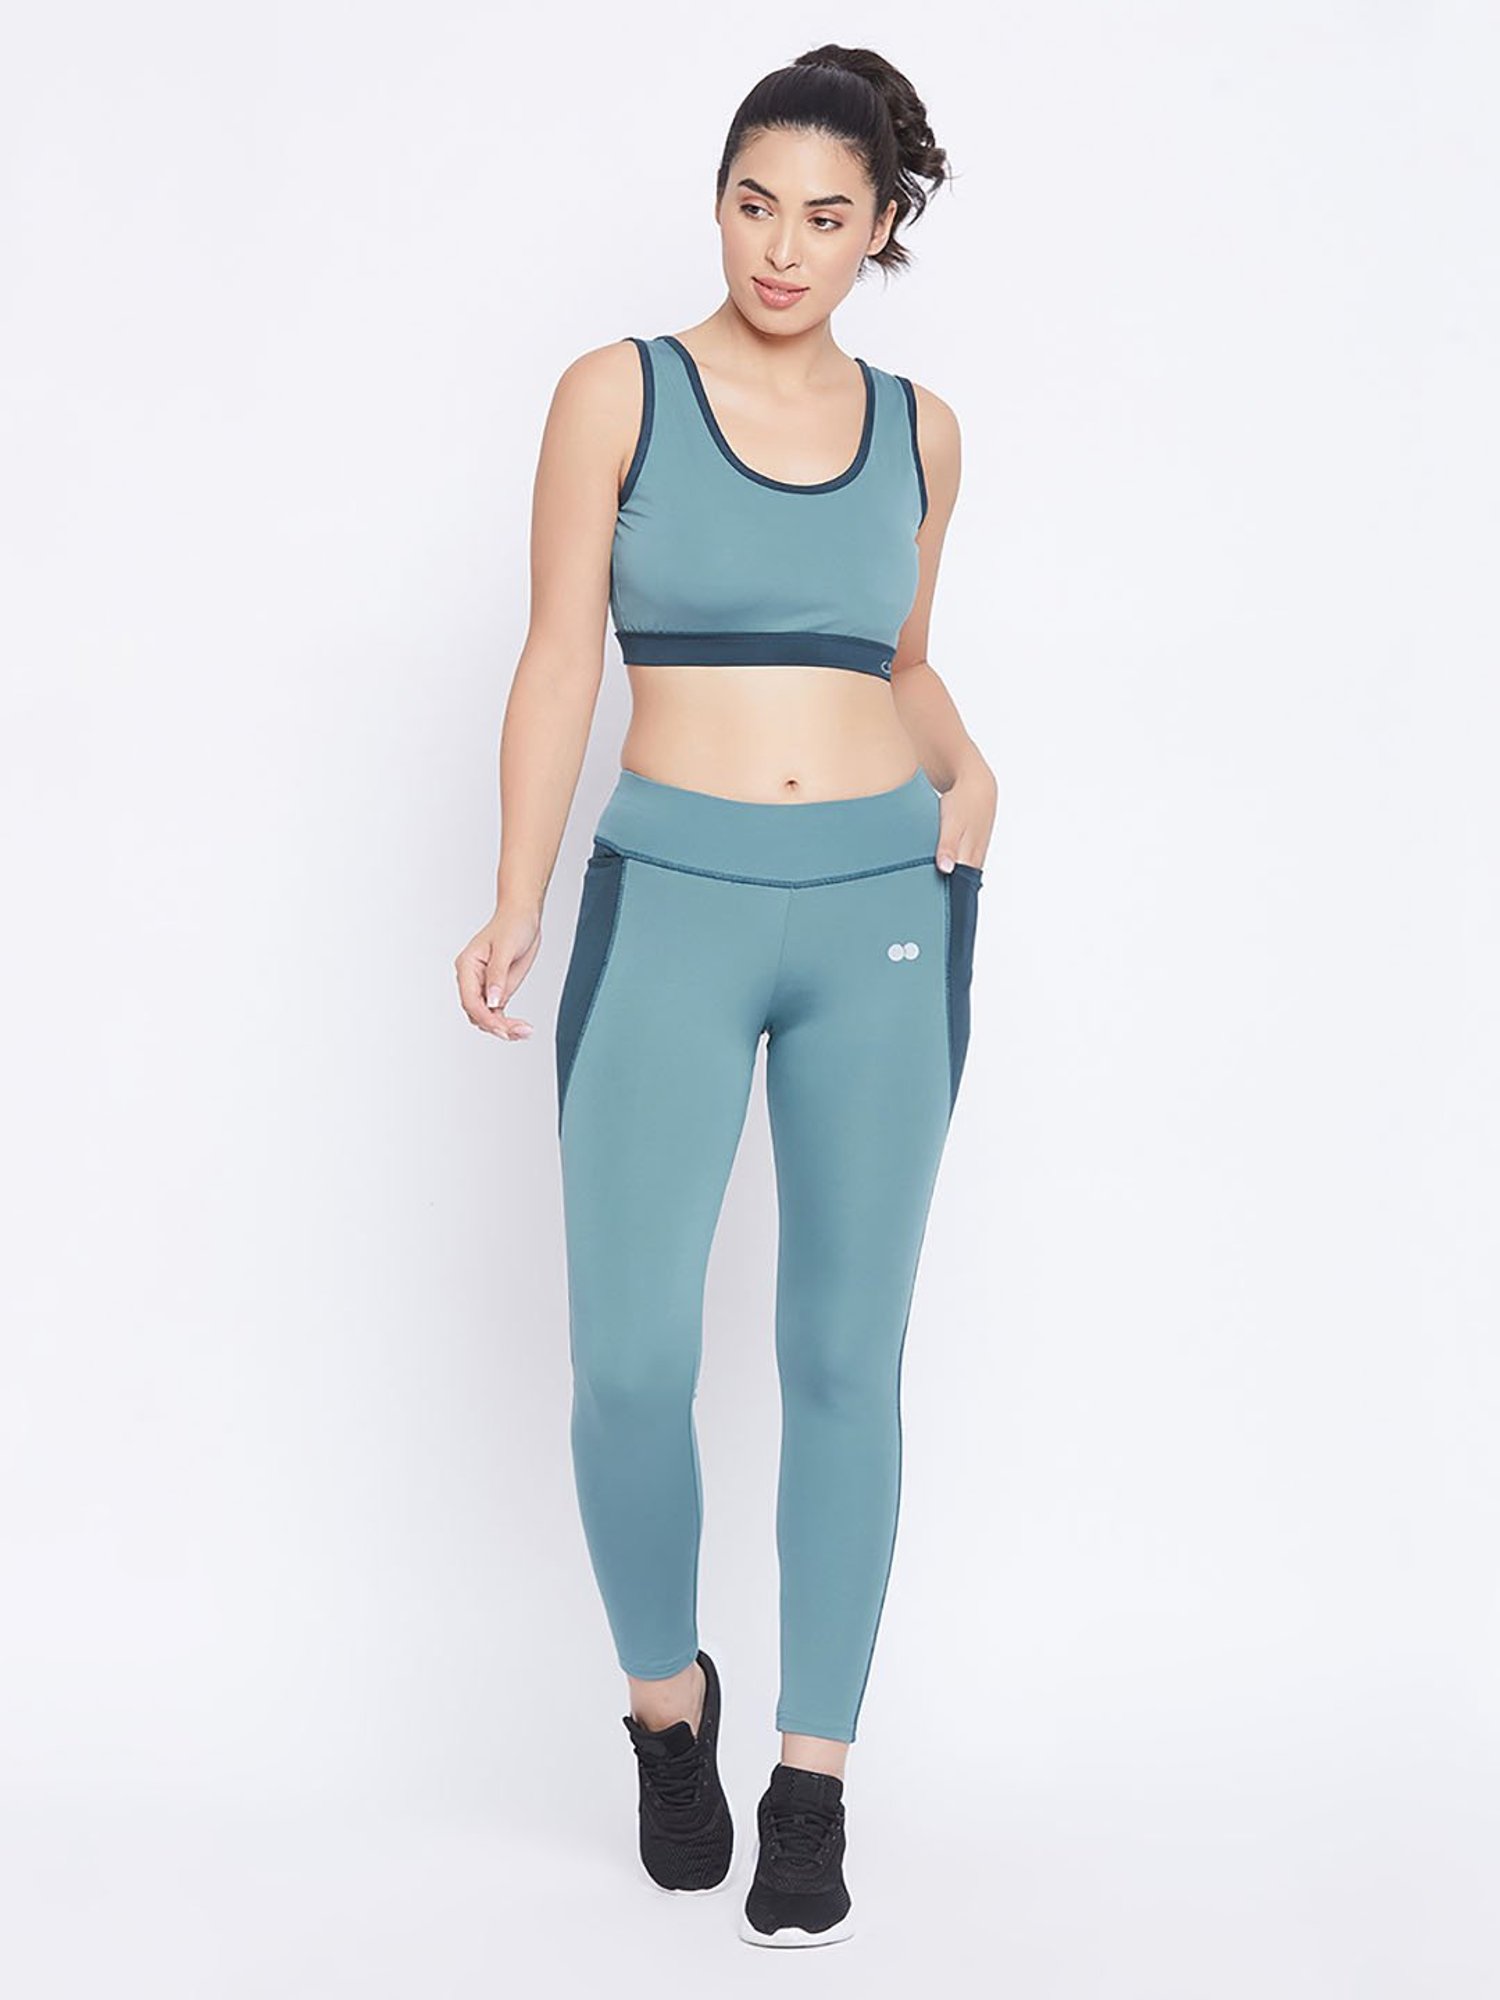 Workout clothes from Old Navy // Cute athleisure that won't break the bank